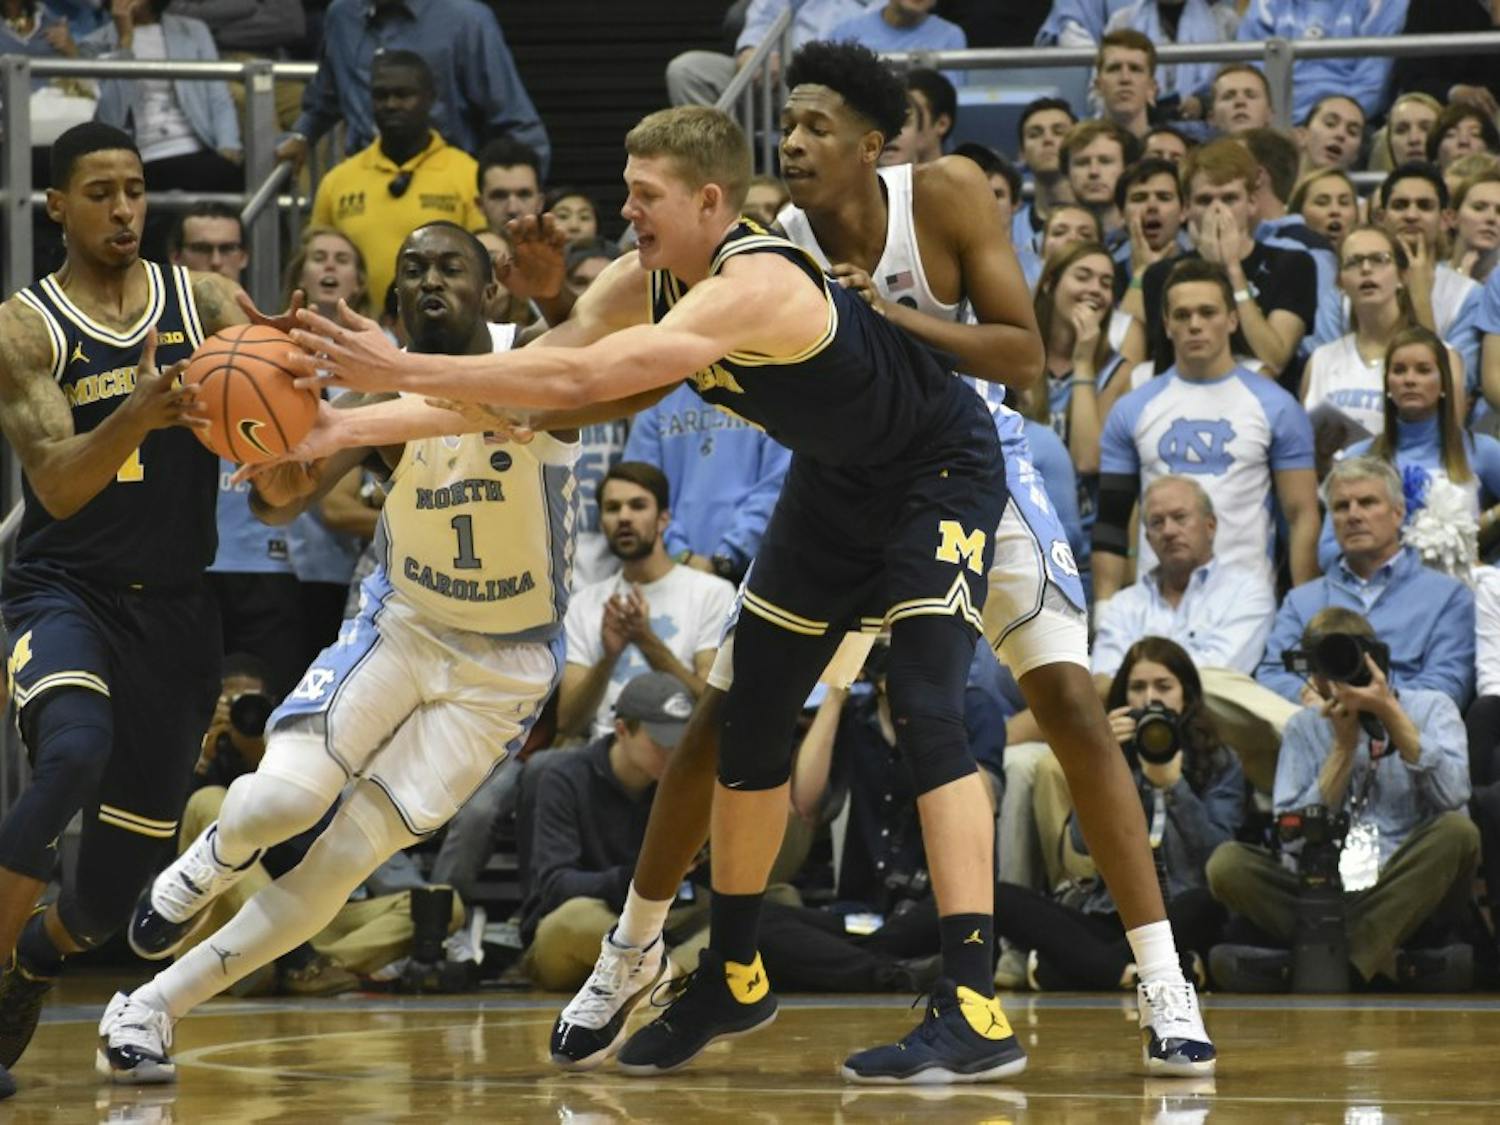 Theo Pinson (1) and Sterling Manley (21) reach to defend a Michigan handoff at the Dean Smith Center on Nov. 30.